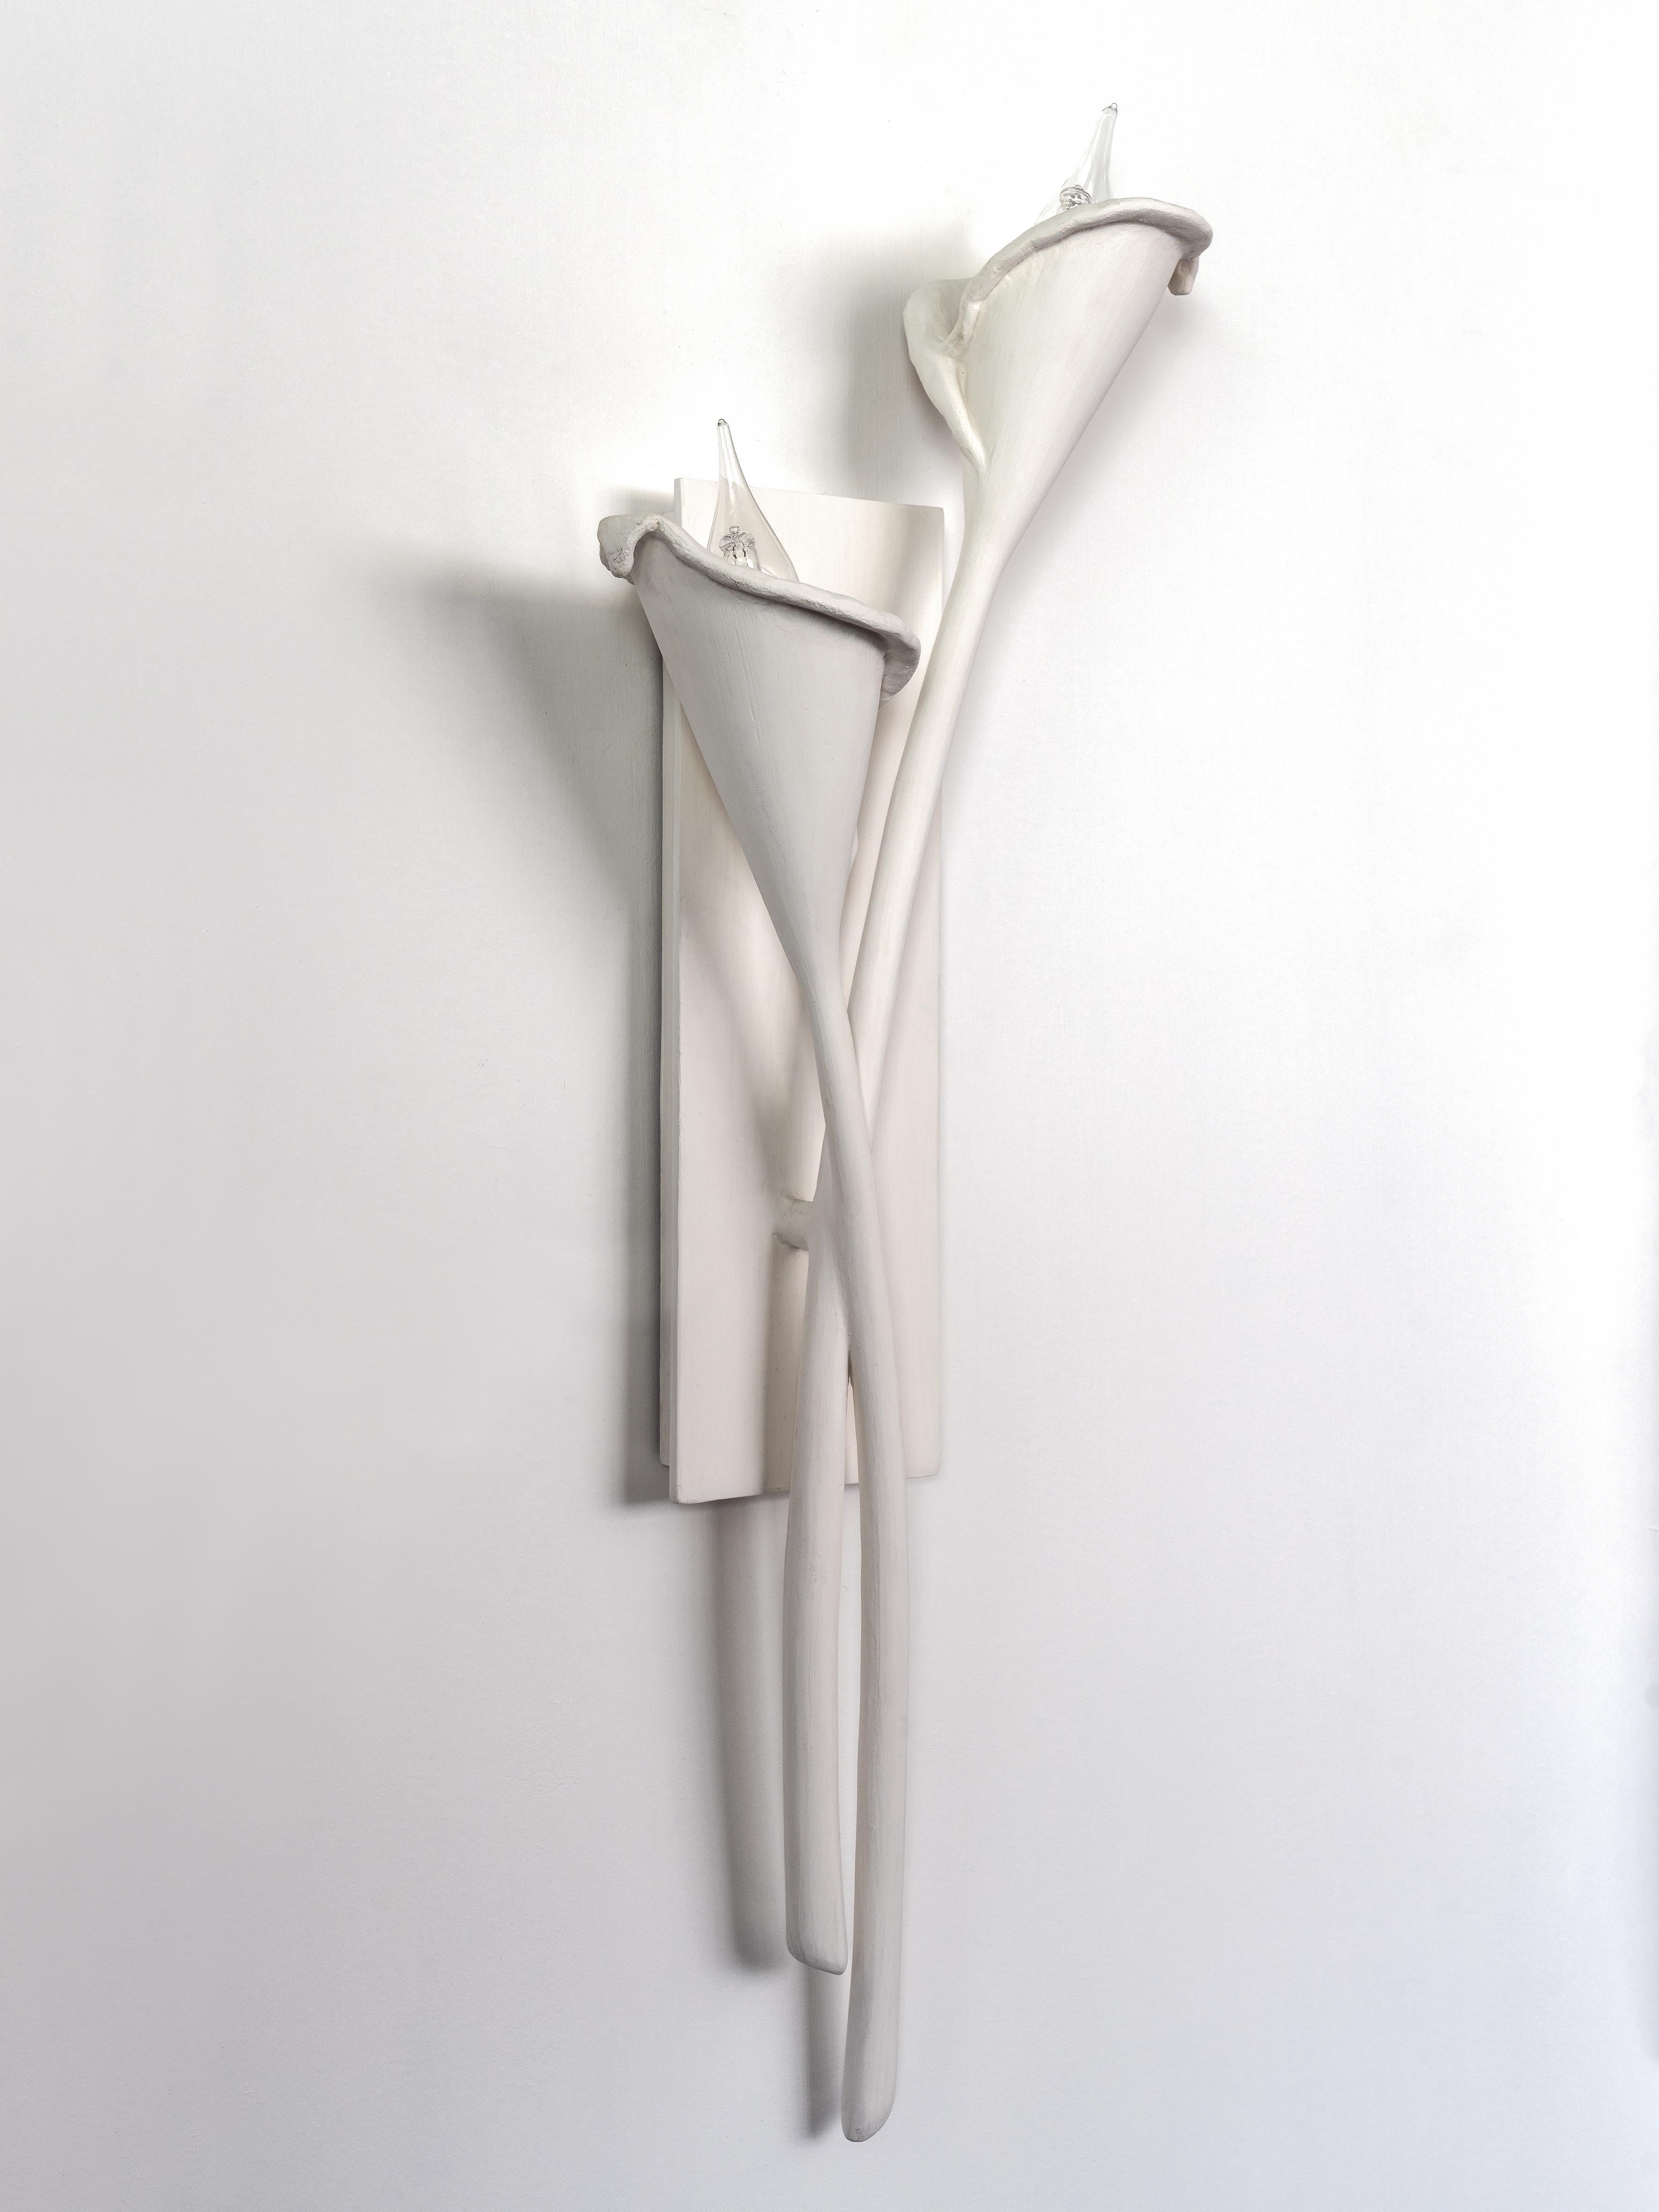 Forged Calla Lily Contemporary Wall Sconce, Wall Light in White Plaster, Pair, Benediko For Sale